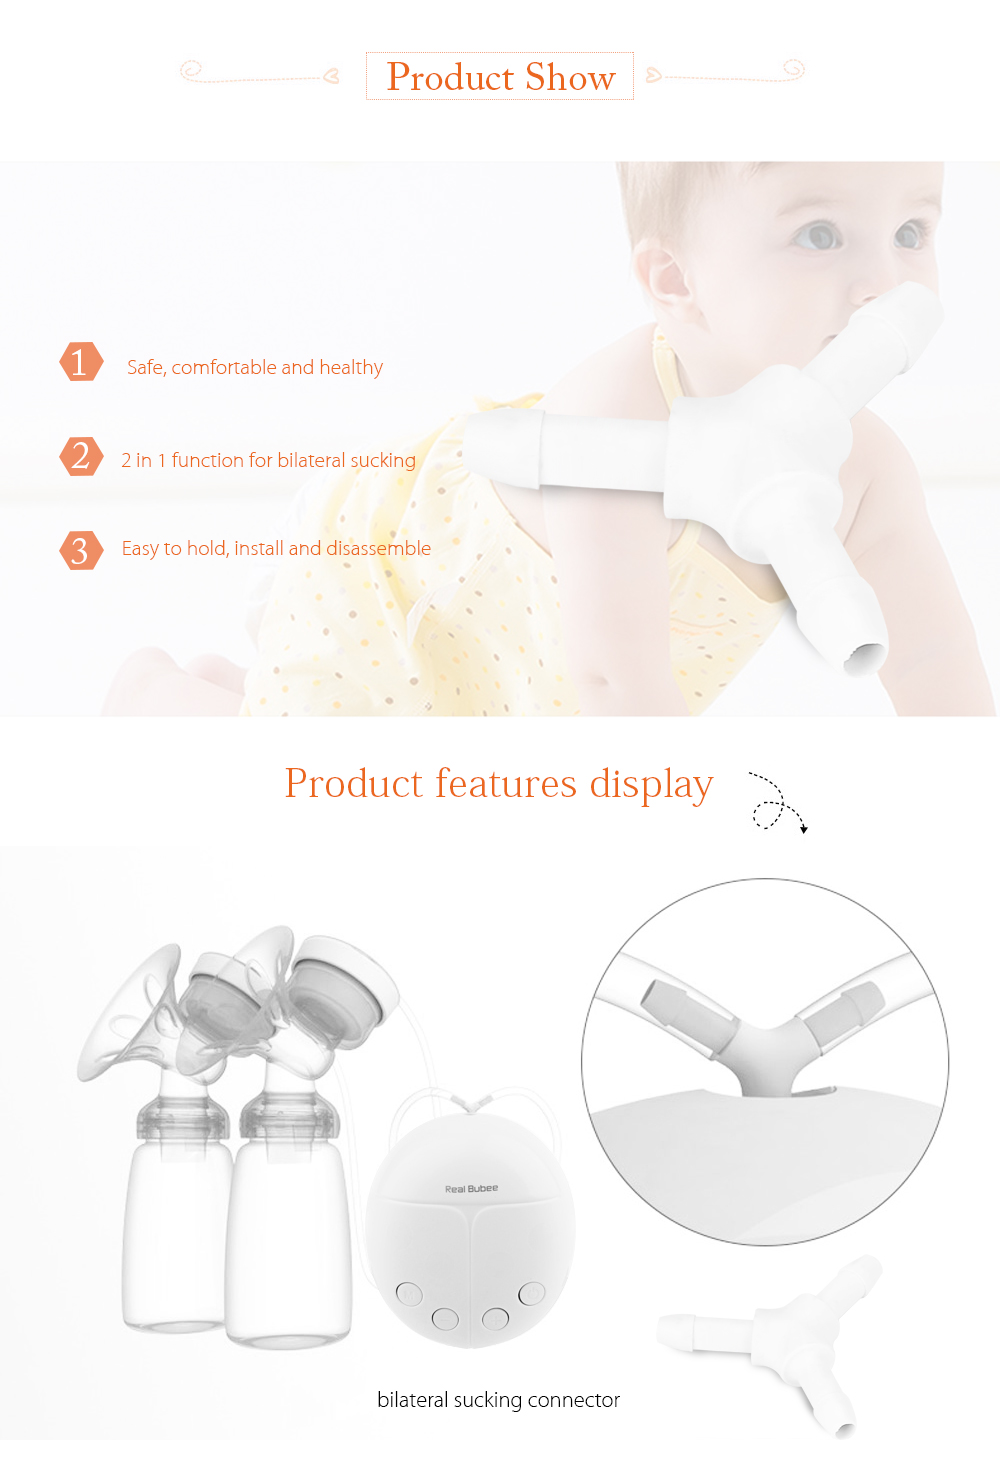 RealBubee 4pcs Double Breast Pump Accessory Sucking Connector Straws for Baby Breastfeeding